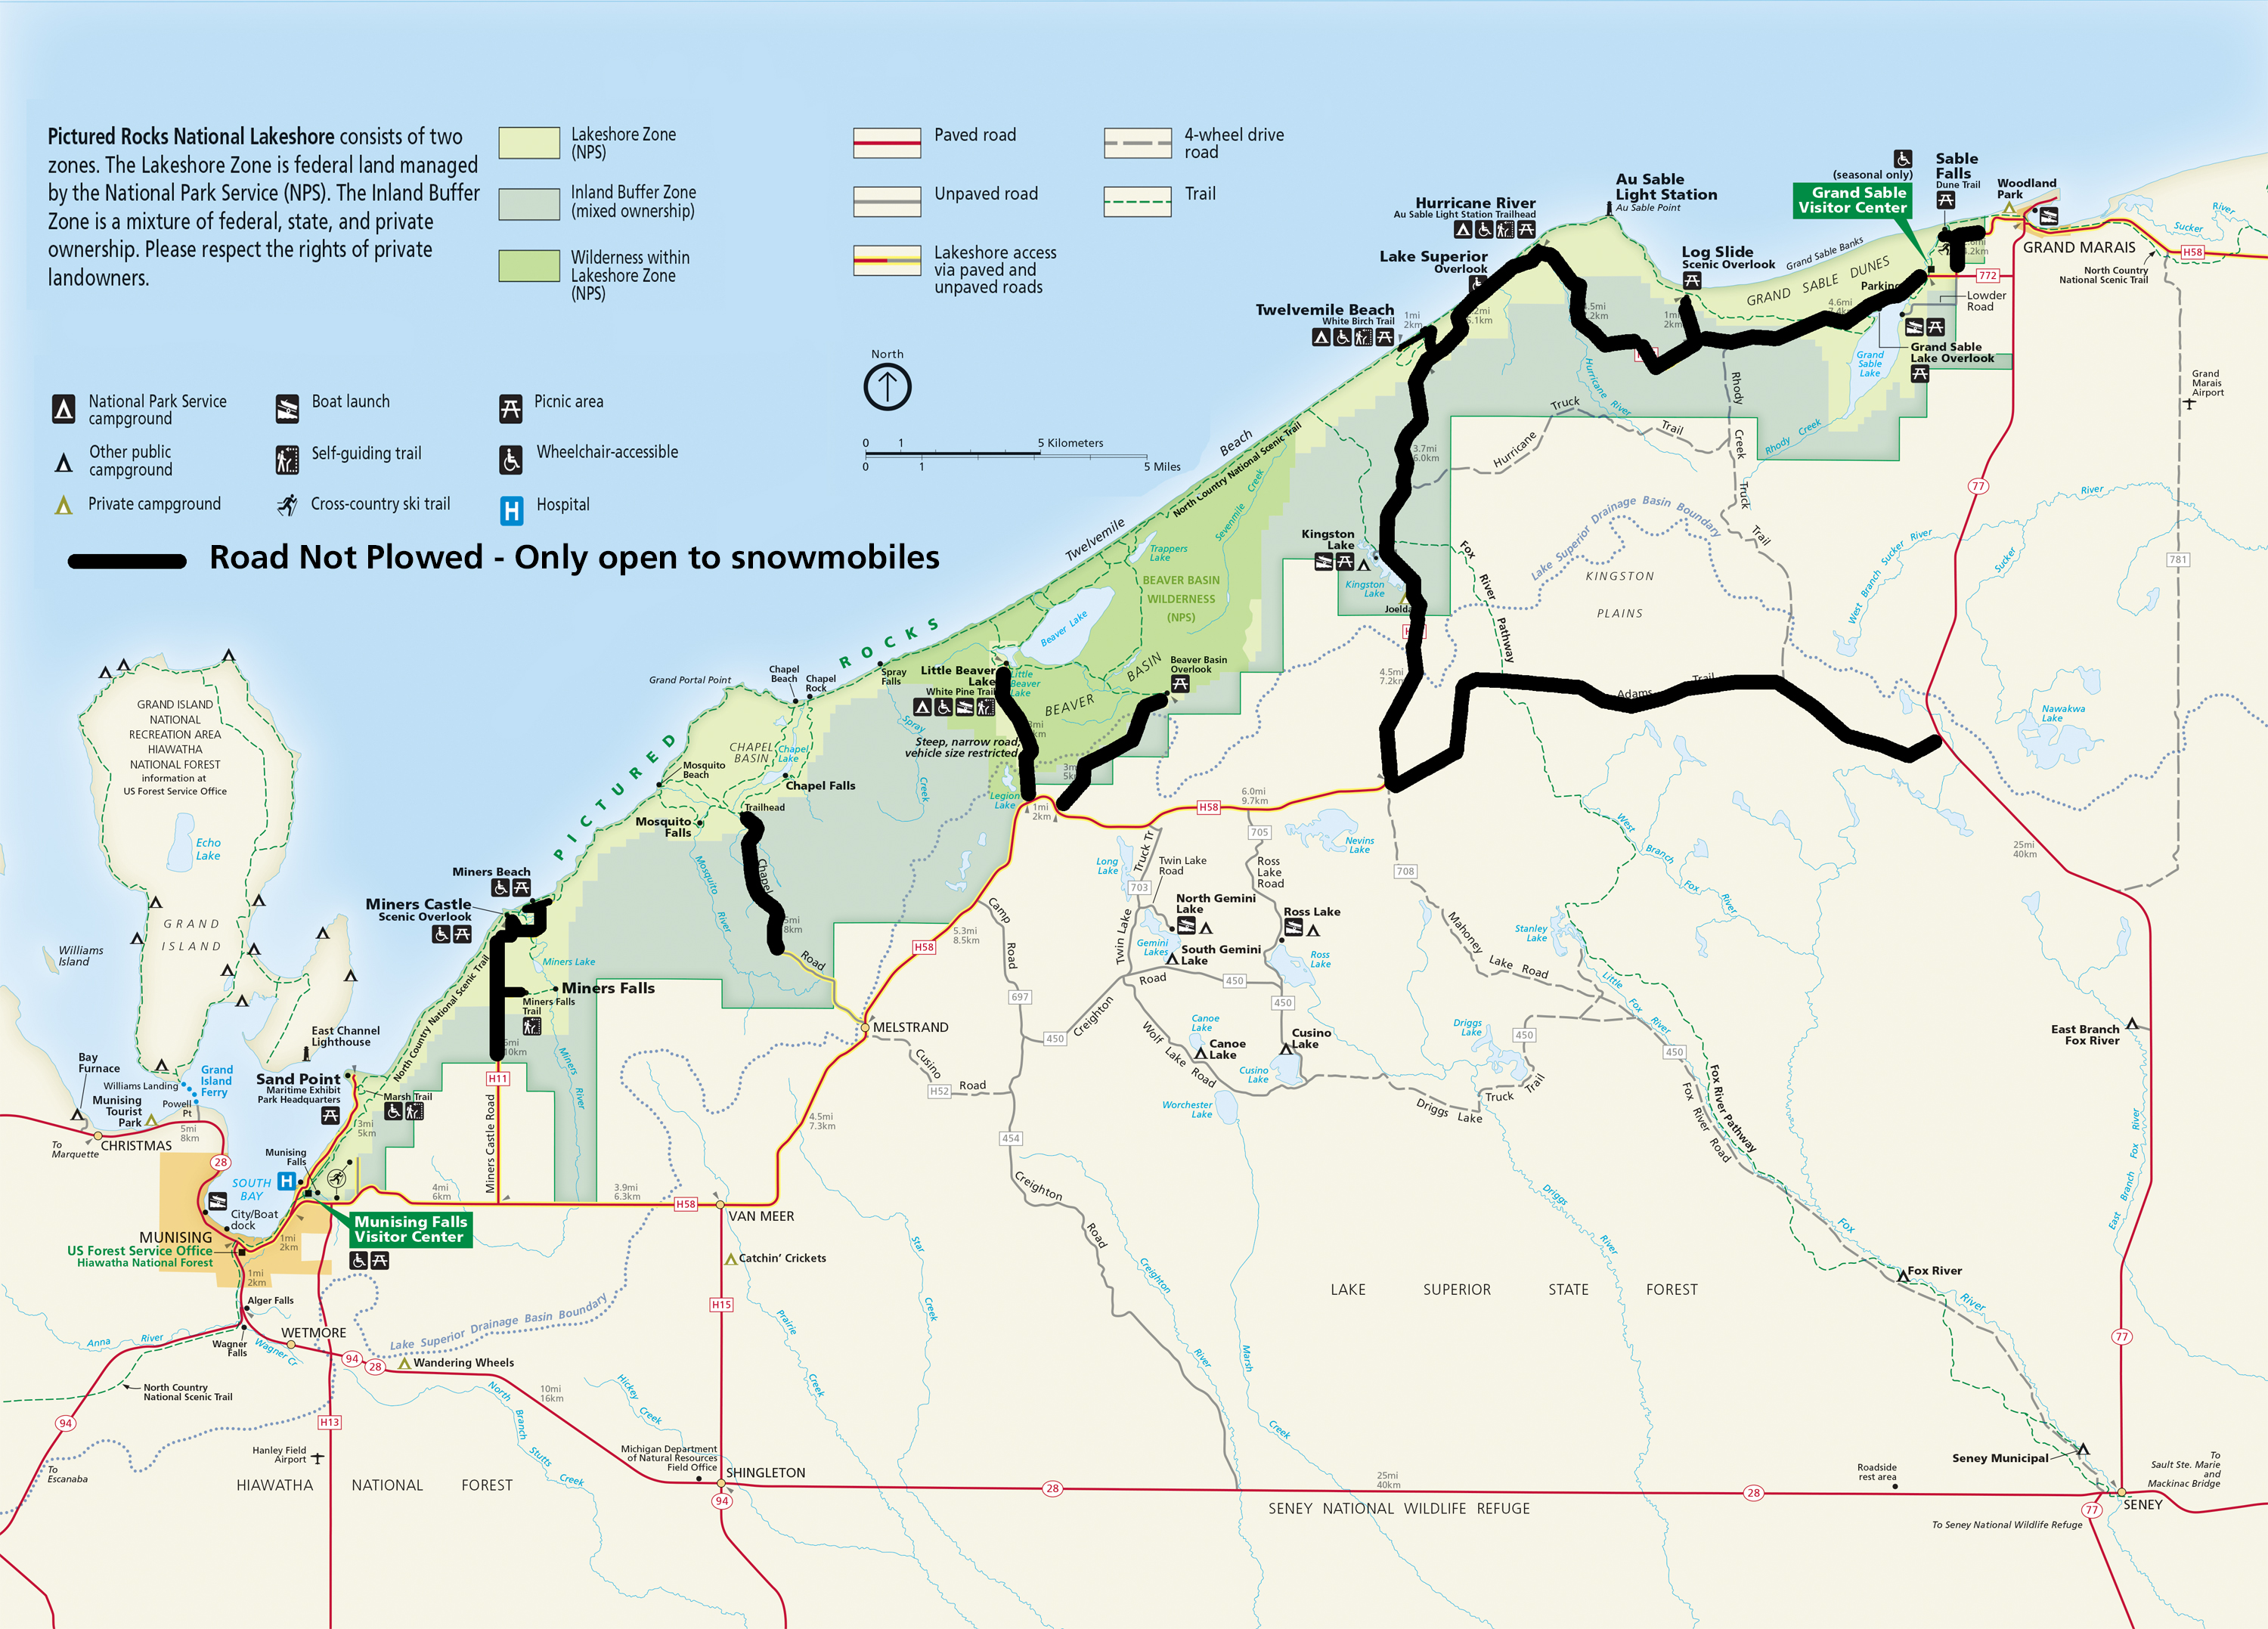 Pictured Rocks Waterfall Map